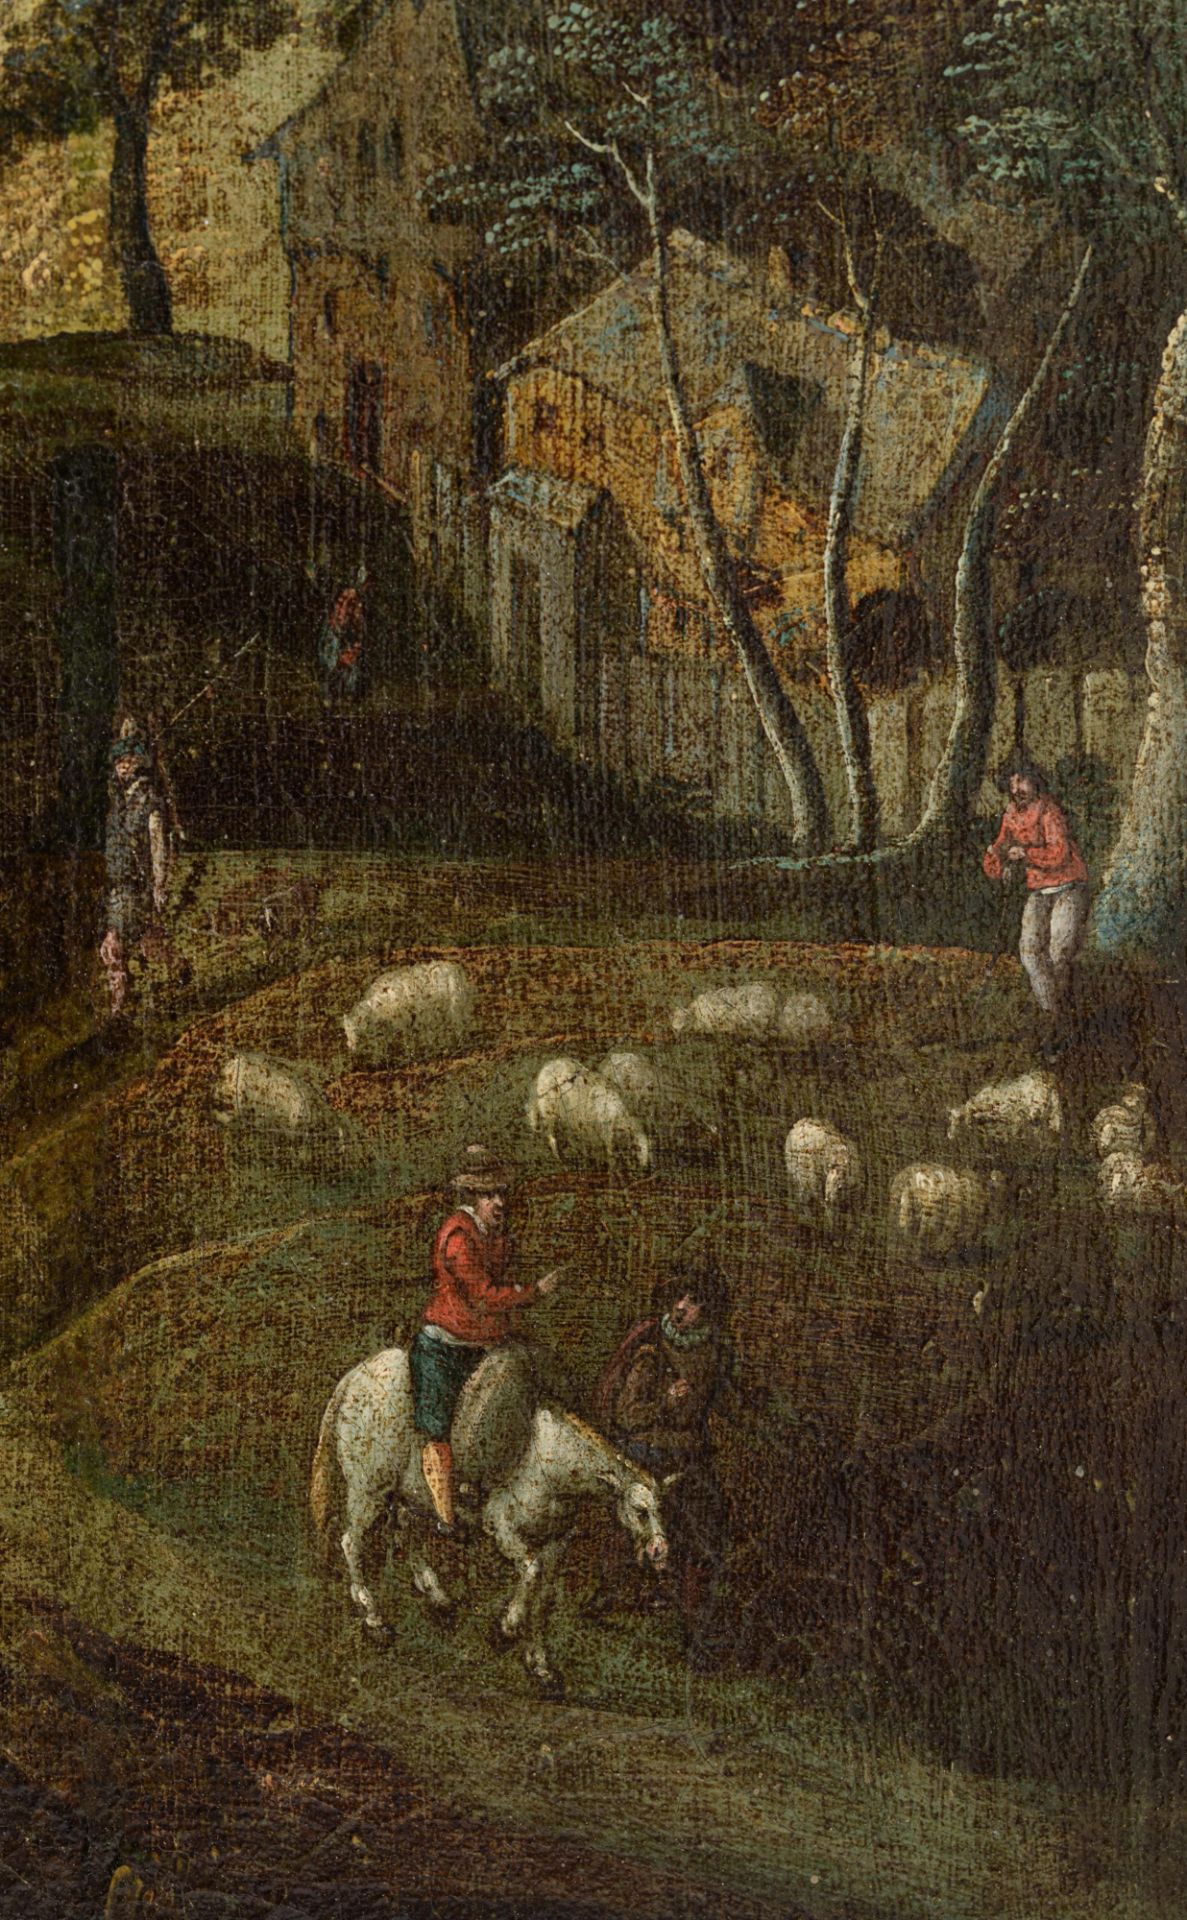 No visible signature, Cephalus and Procris in a landscape, the Southern Netherlands, late 16thC - ea - Image 9 of 11